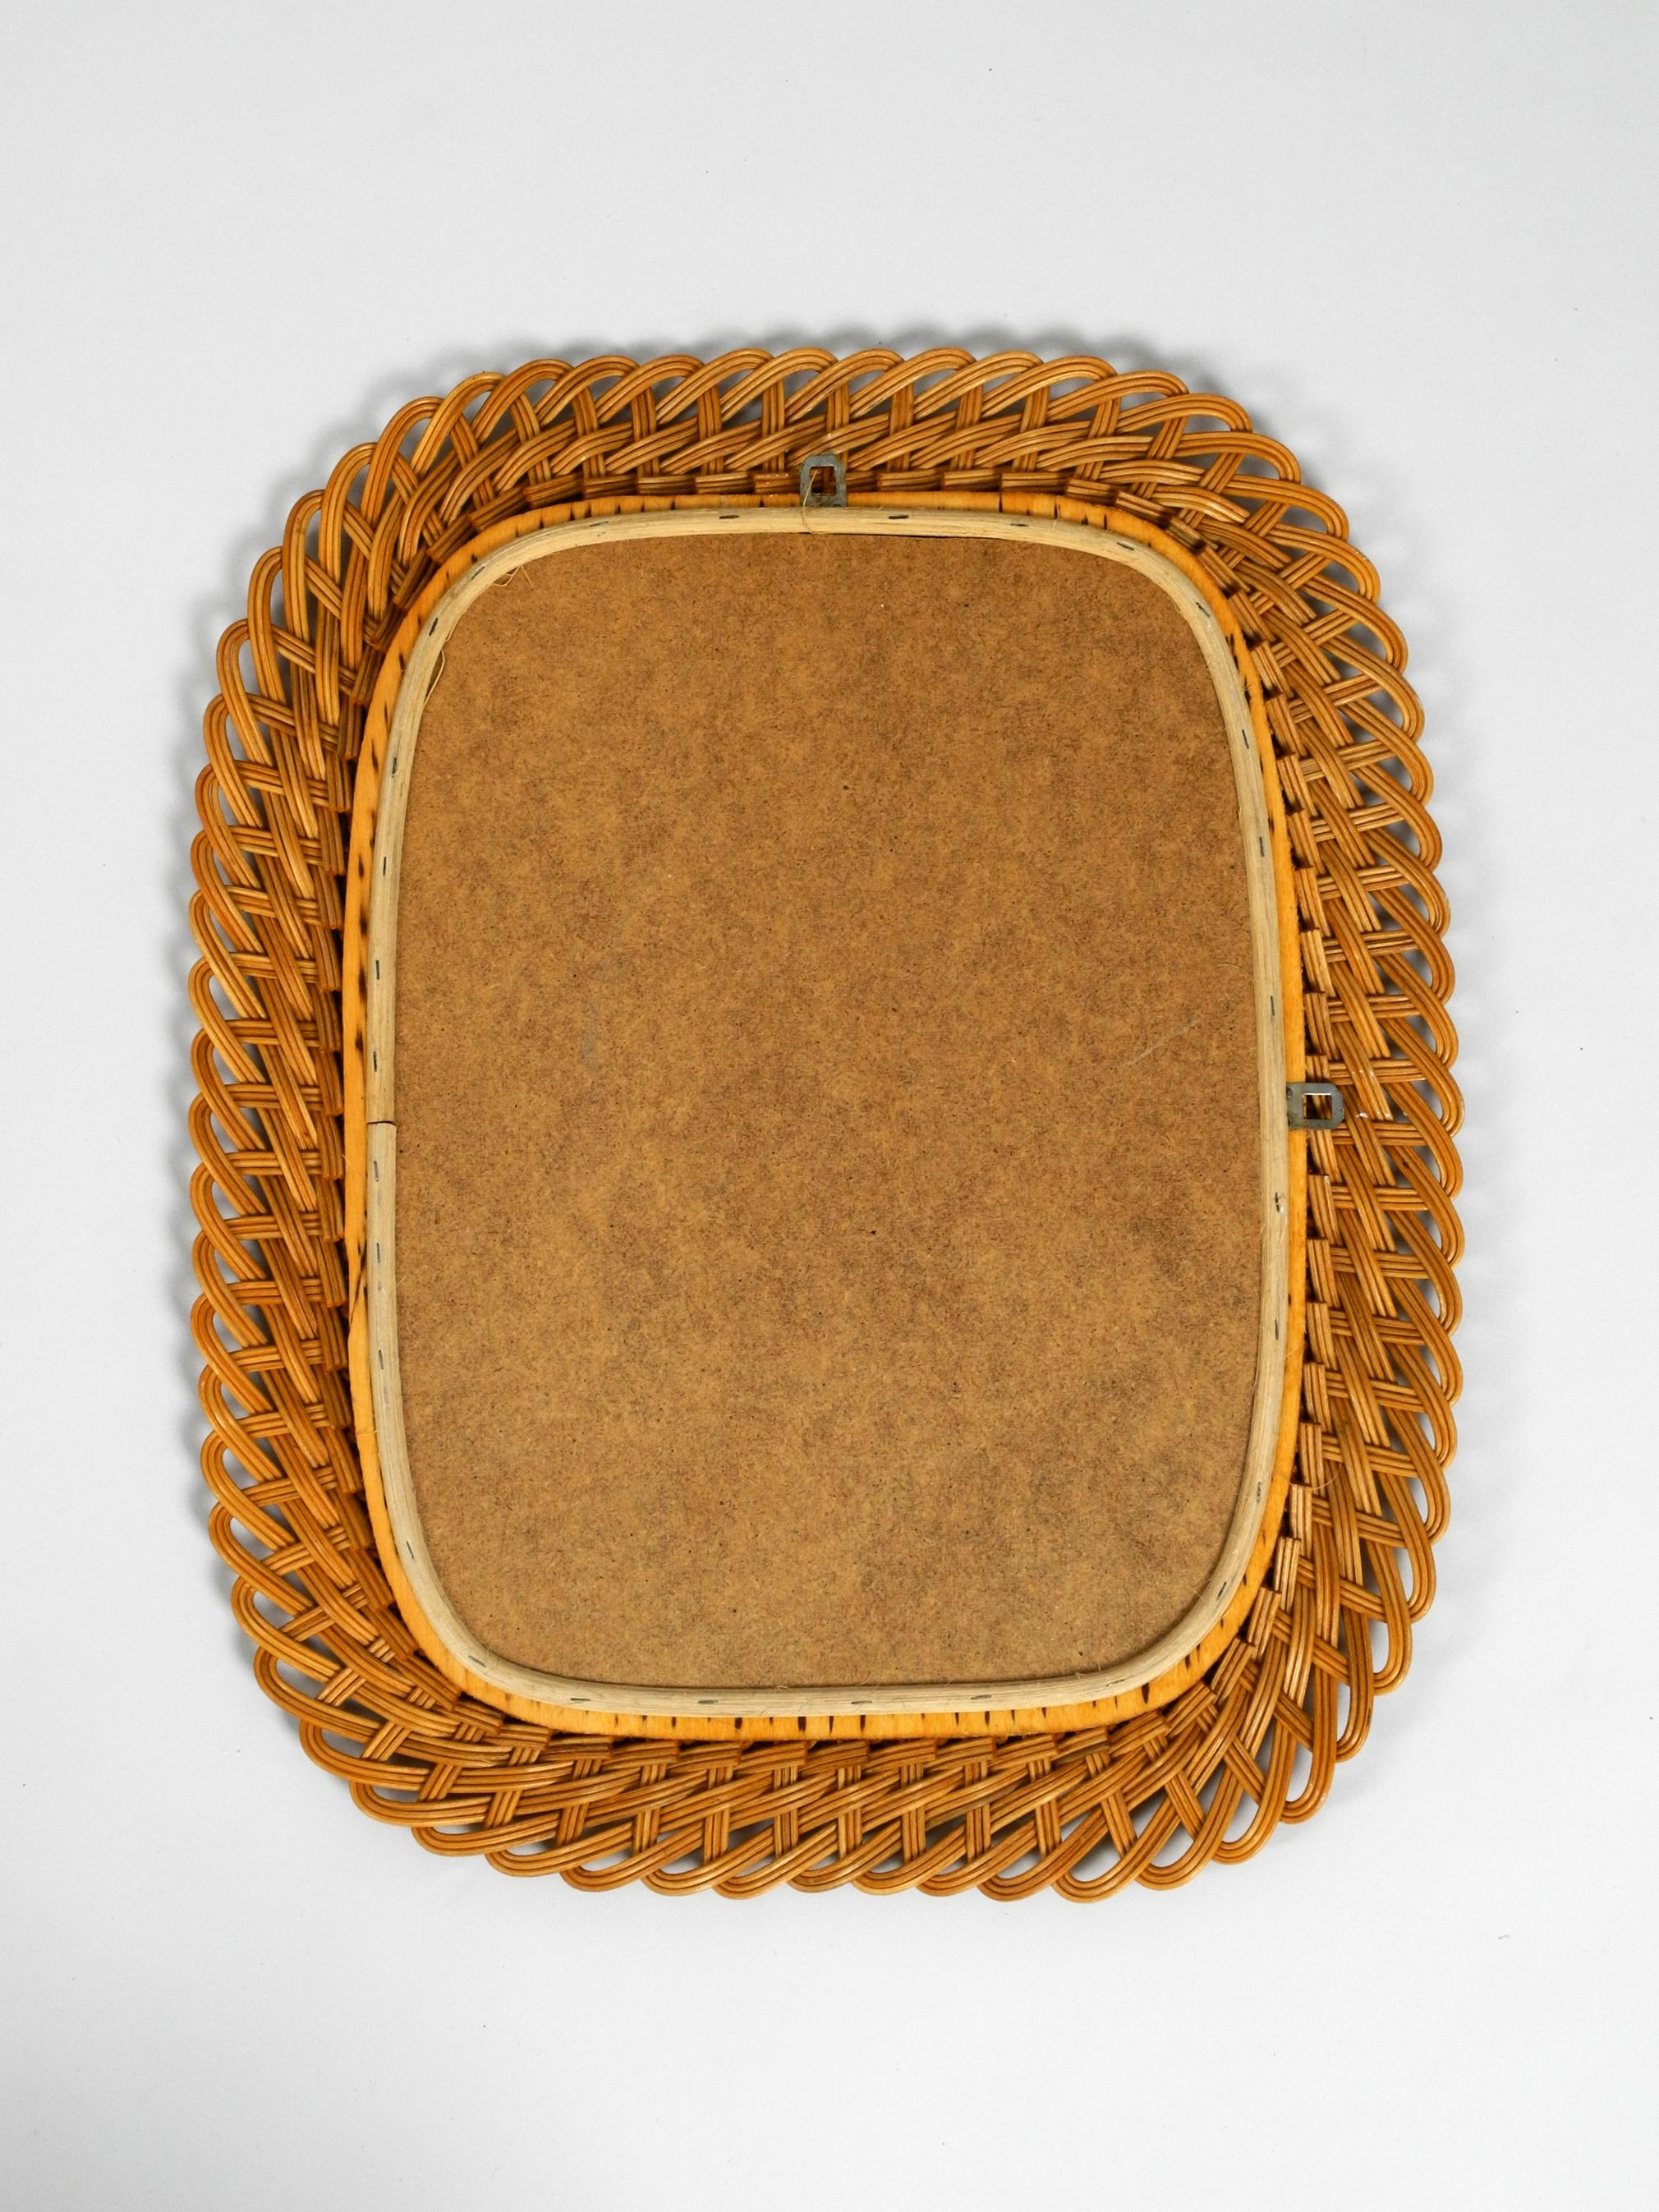 Very Nice 1960s Wall Mirror with Frame Made of Wide Wicker 8